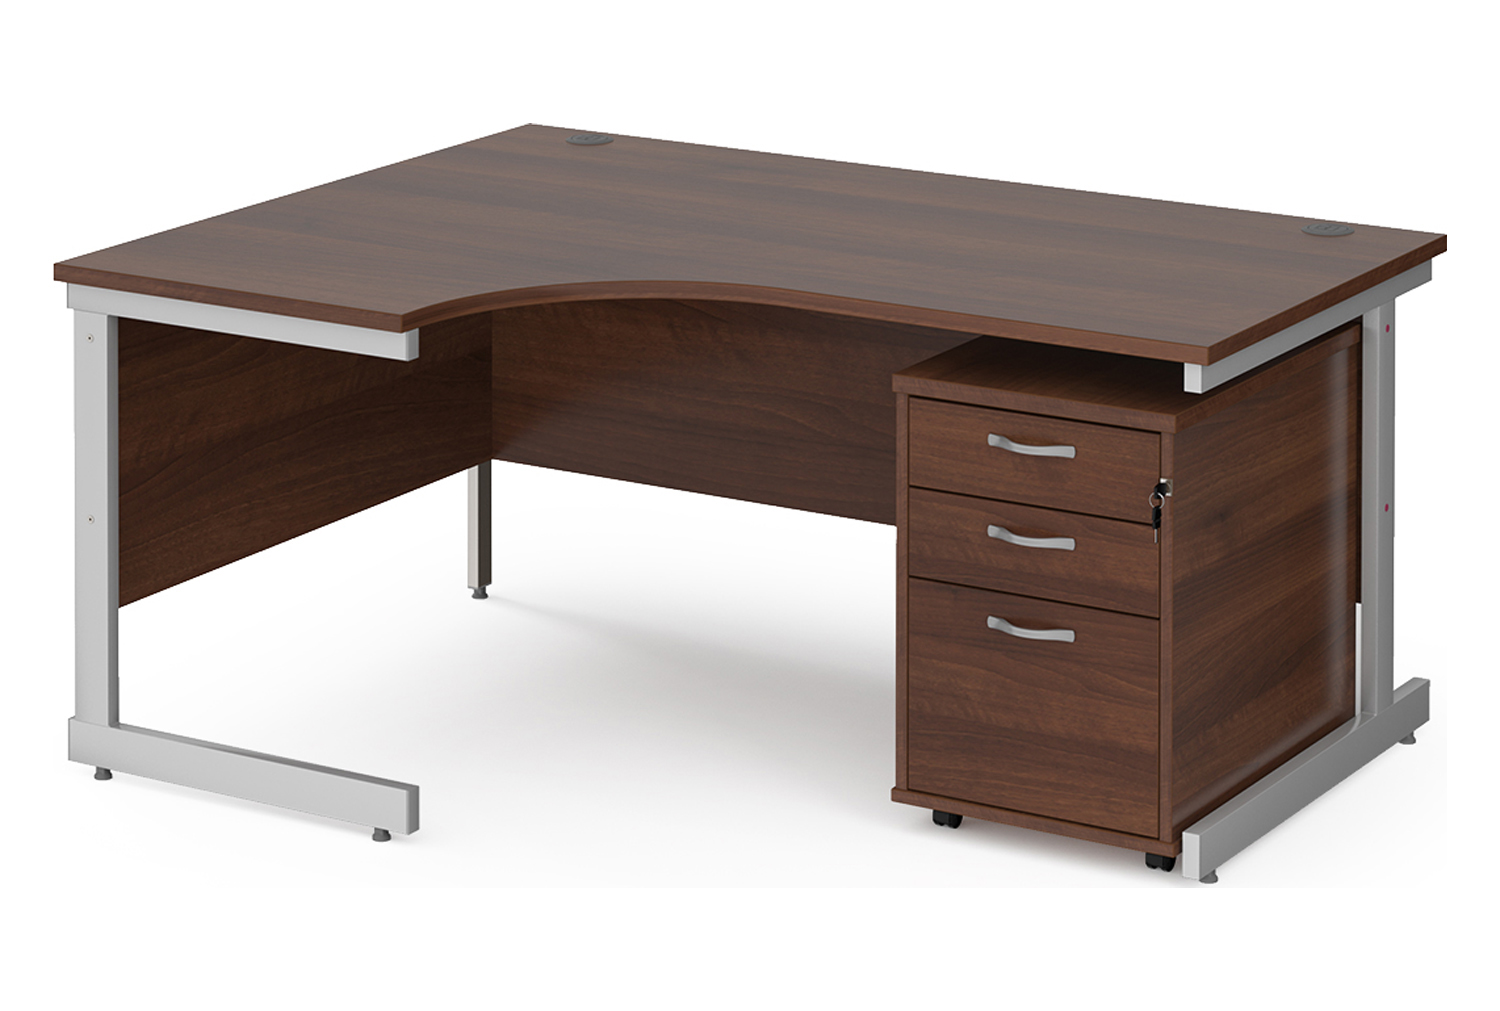 Thrifty Next-Day Office Desk Bundle Deal 11 Walnut, Express Delivery